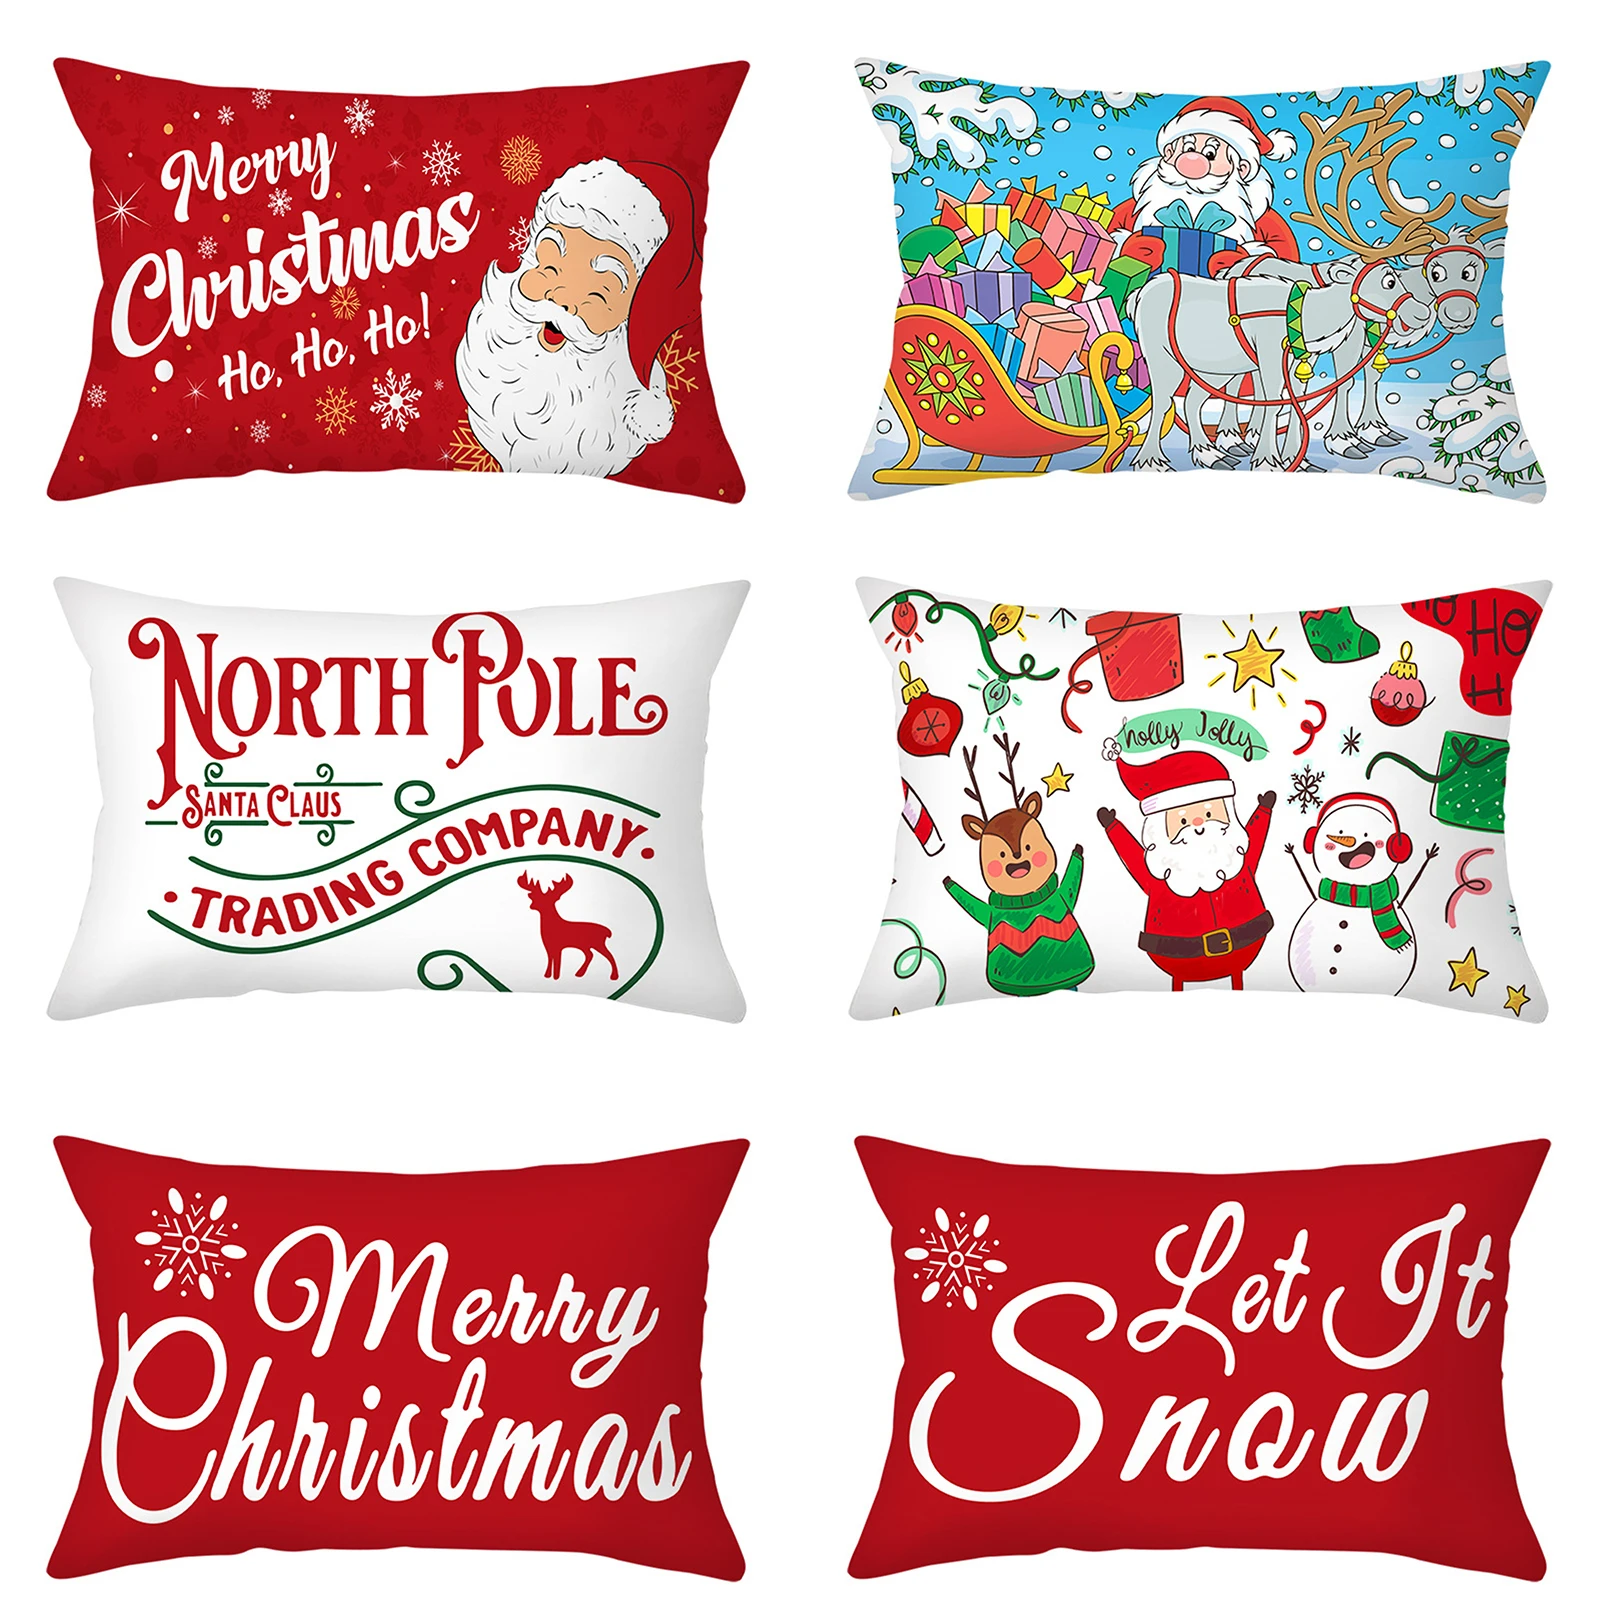 

22 Merry Christmas White Red Pillow Case for Xmas Style Printed Deer Santas Cushion Cover Home Decorative Sofa Throw Pillowcases